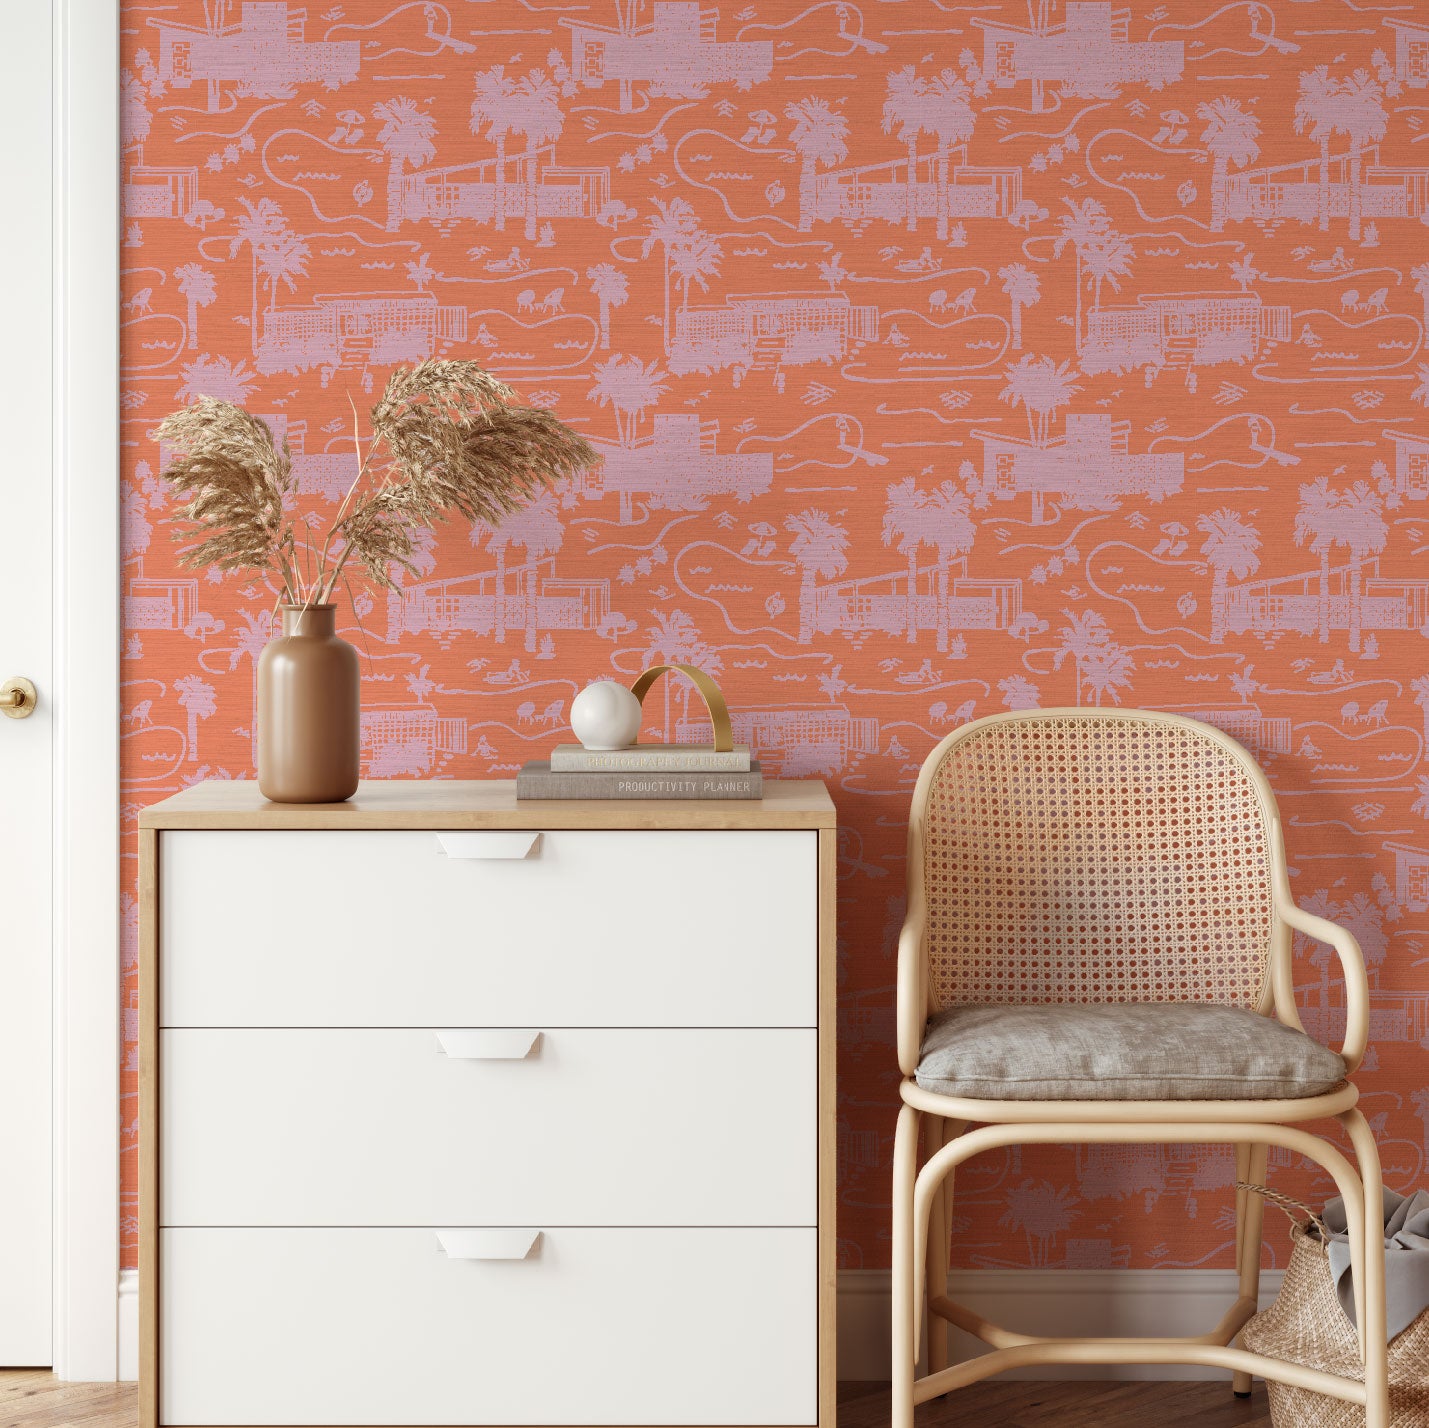 dresser and chair in front of grasscloth toile printed wallpaper with mid century modern houses inspired by palm springs featuring swimming pools, palm trees and secret suntanning ladies in this hand drawn one color printed design with coral base and light pink print